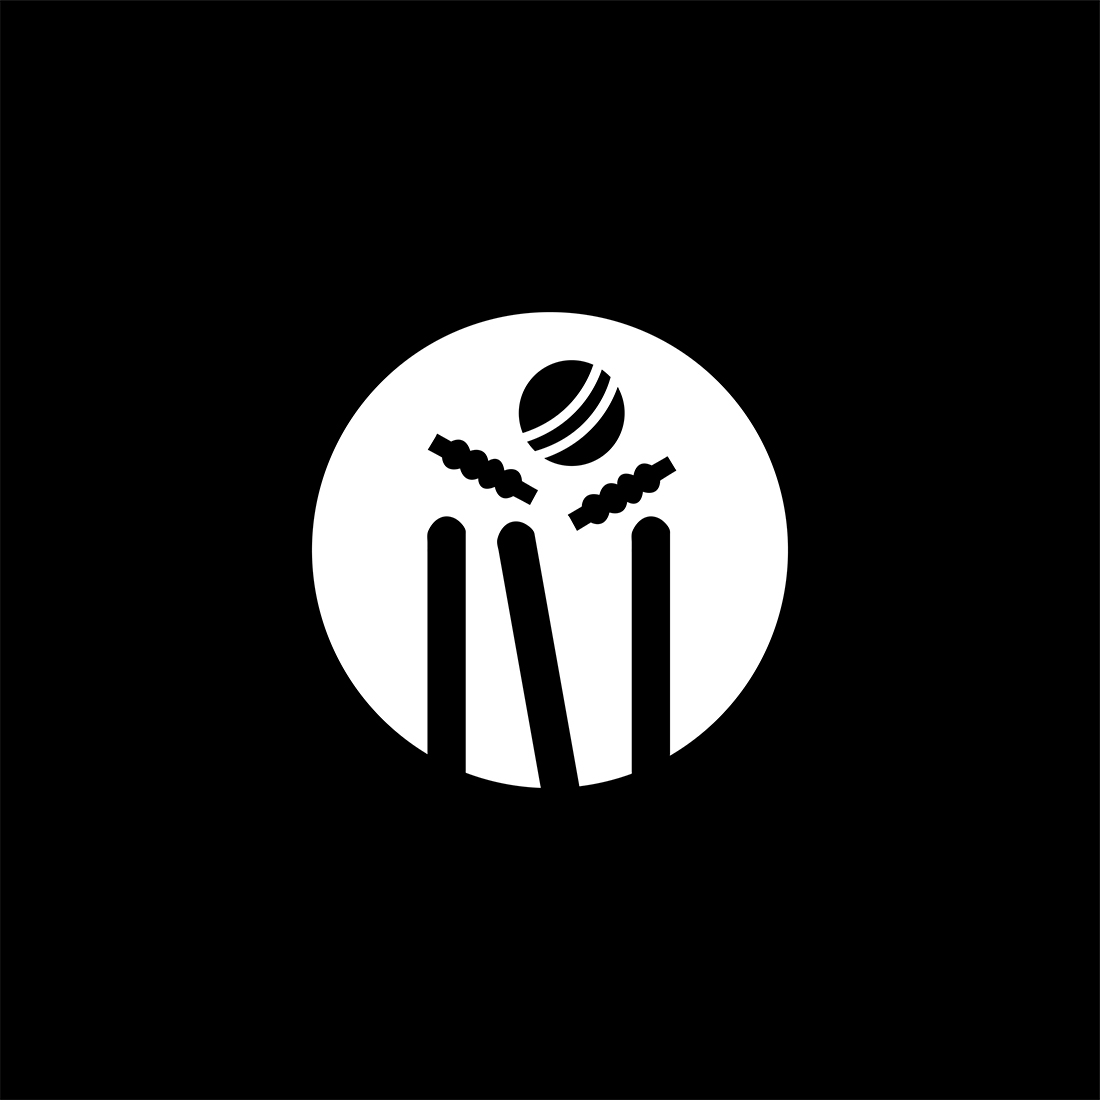 Cricket Wickets Bold Abstract Mark Pictorial Emblem Logo